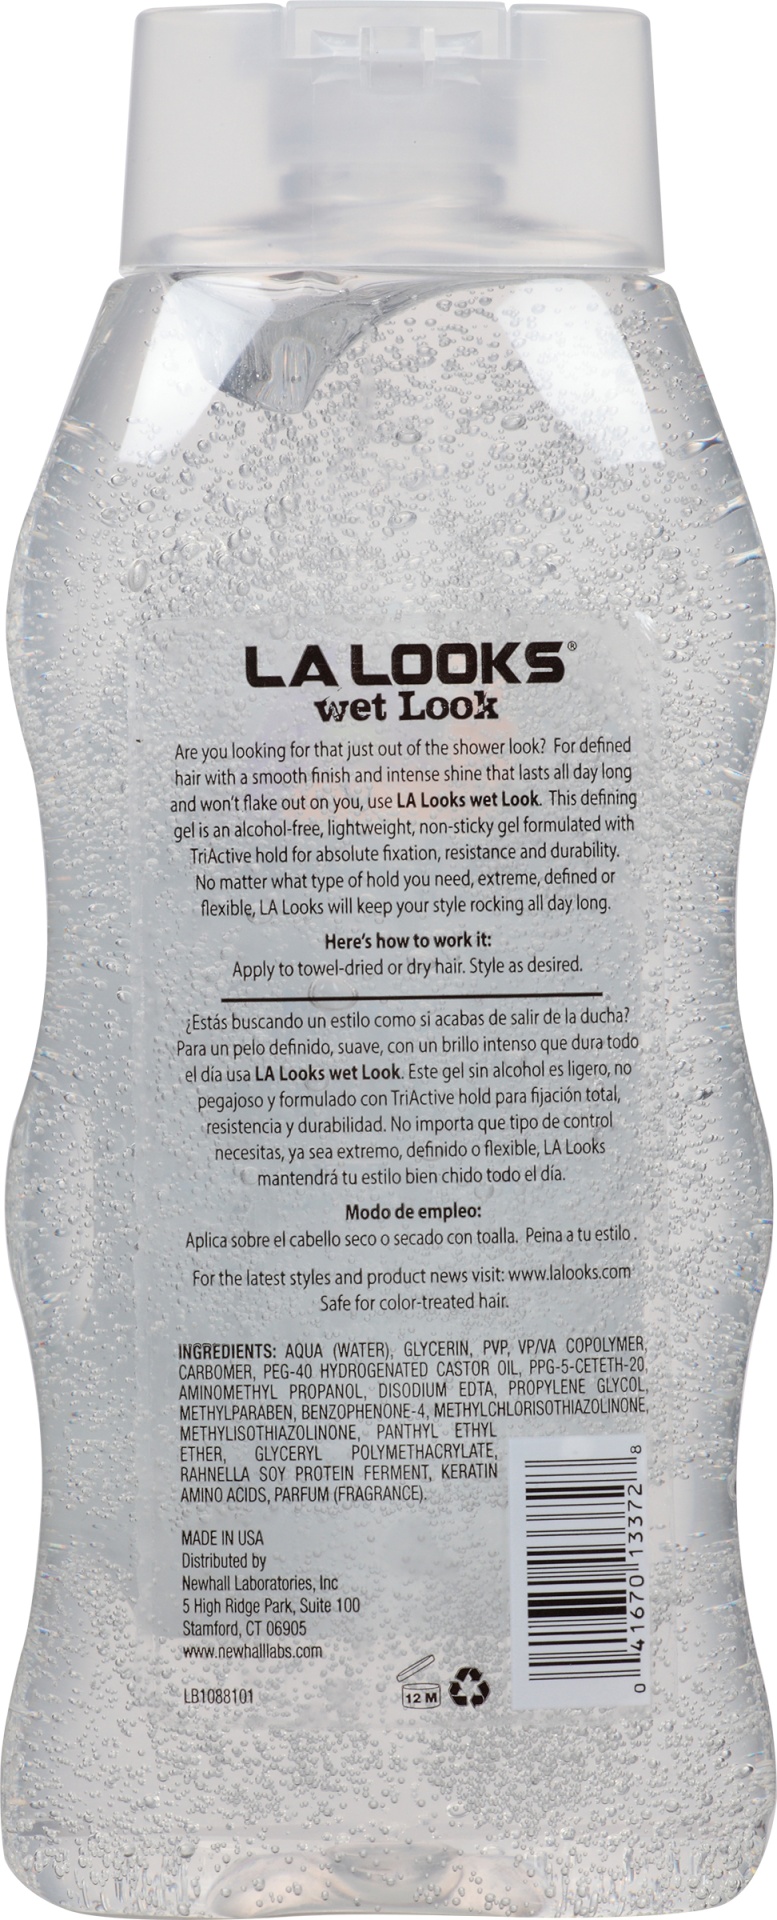 slide 6 of 7, L.A. Looks Level 10 Hold Absolute Styling Wet Look Gel, 20 oz